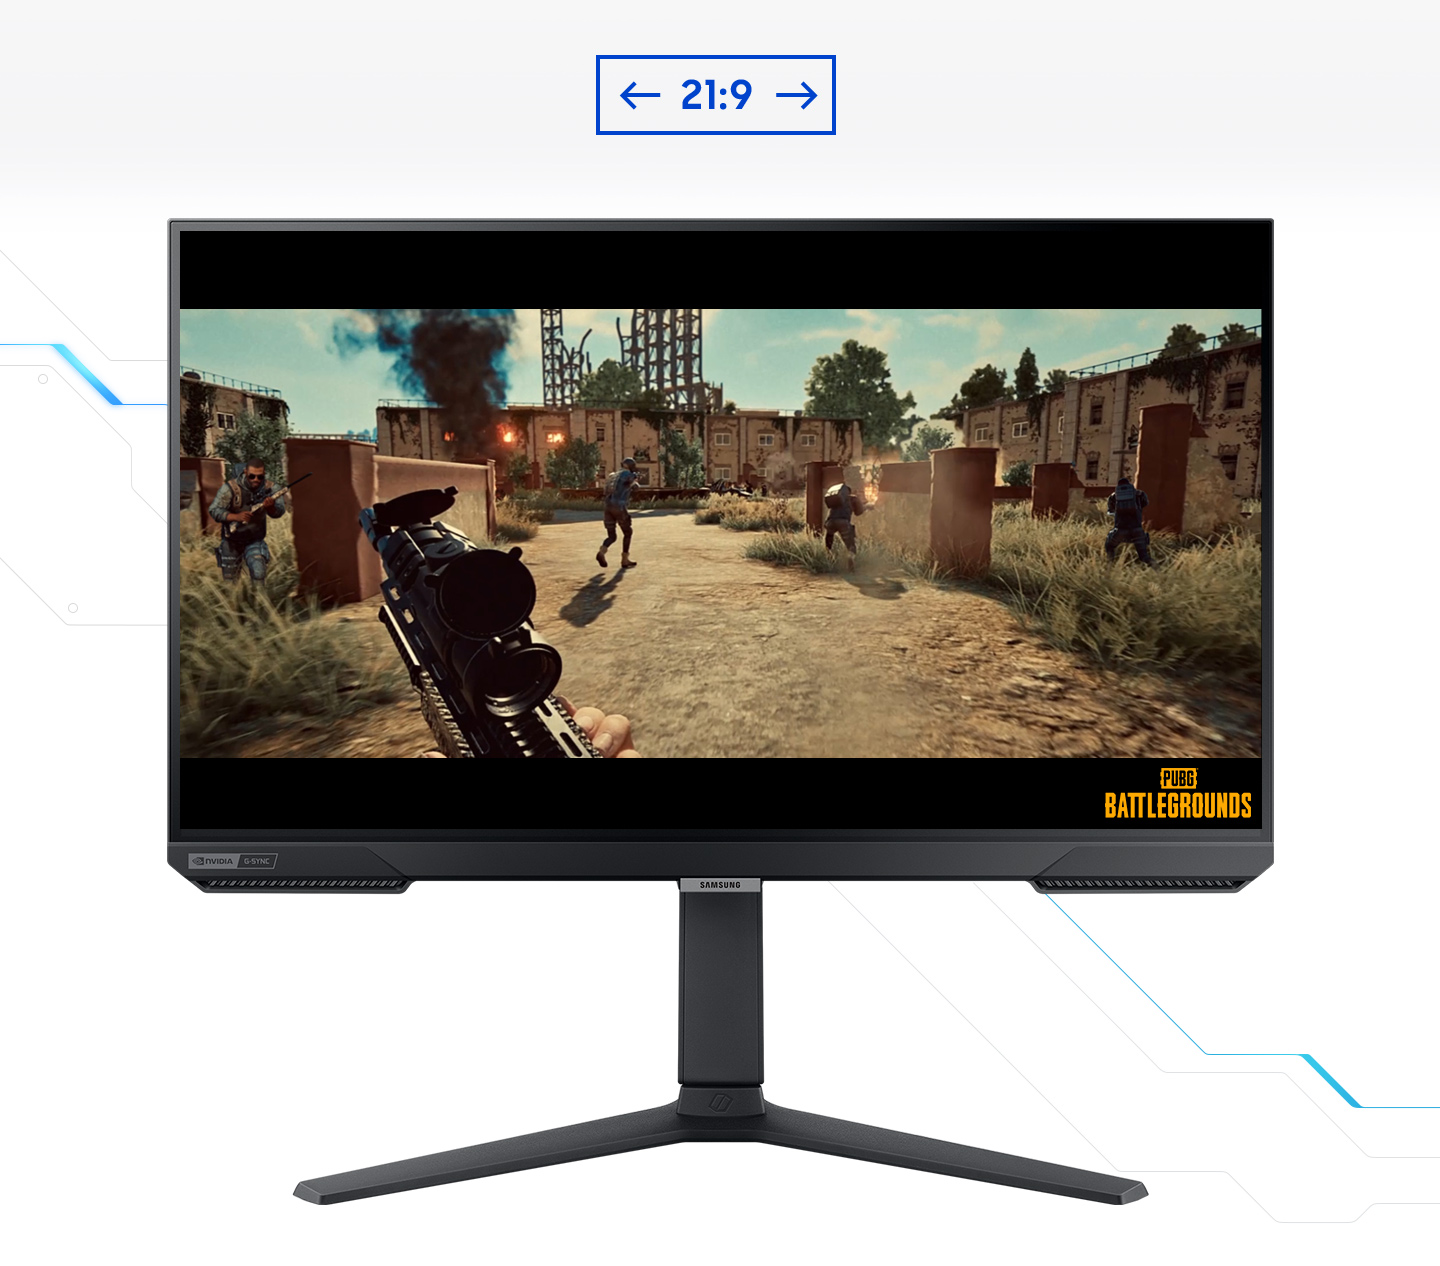  Fiodio 35” Ultra Wide QHD 21:9 Gaming Monitor, with